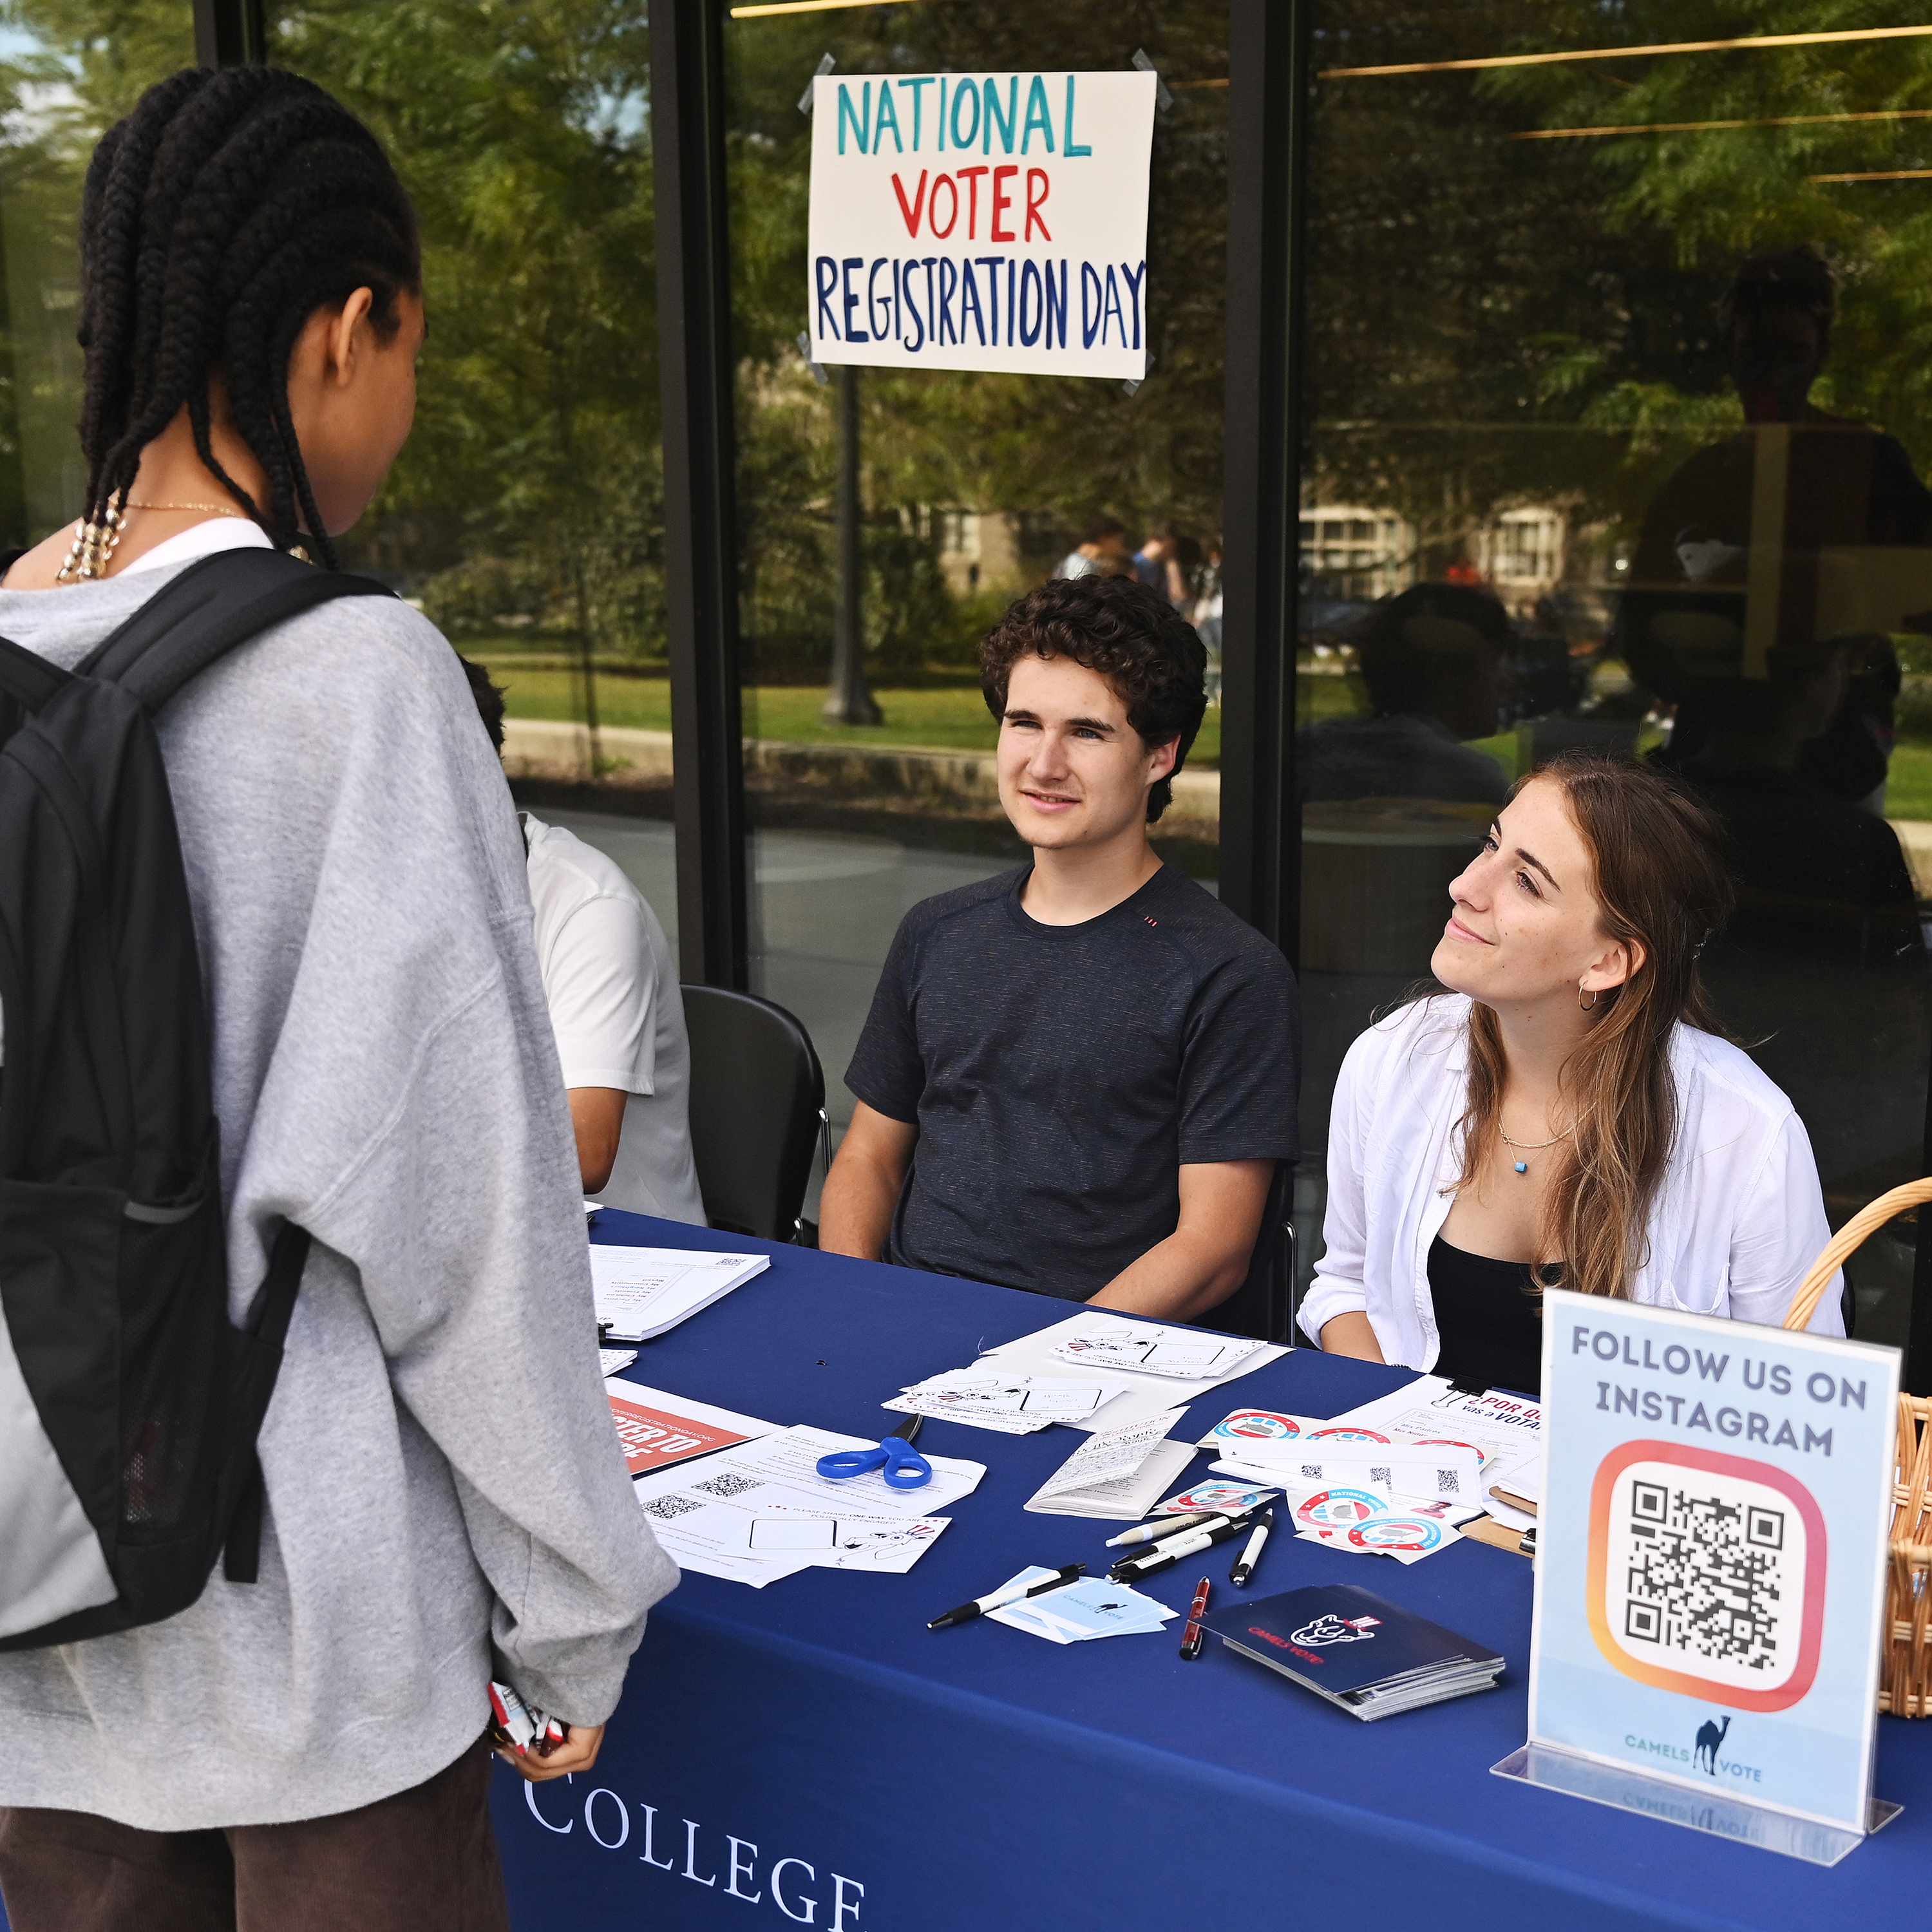 Miranda Van Mooy ’24, right, speaks to a student during a voter registration drive in front of Shain Library.